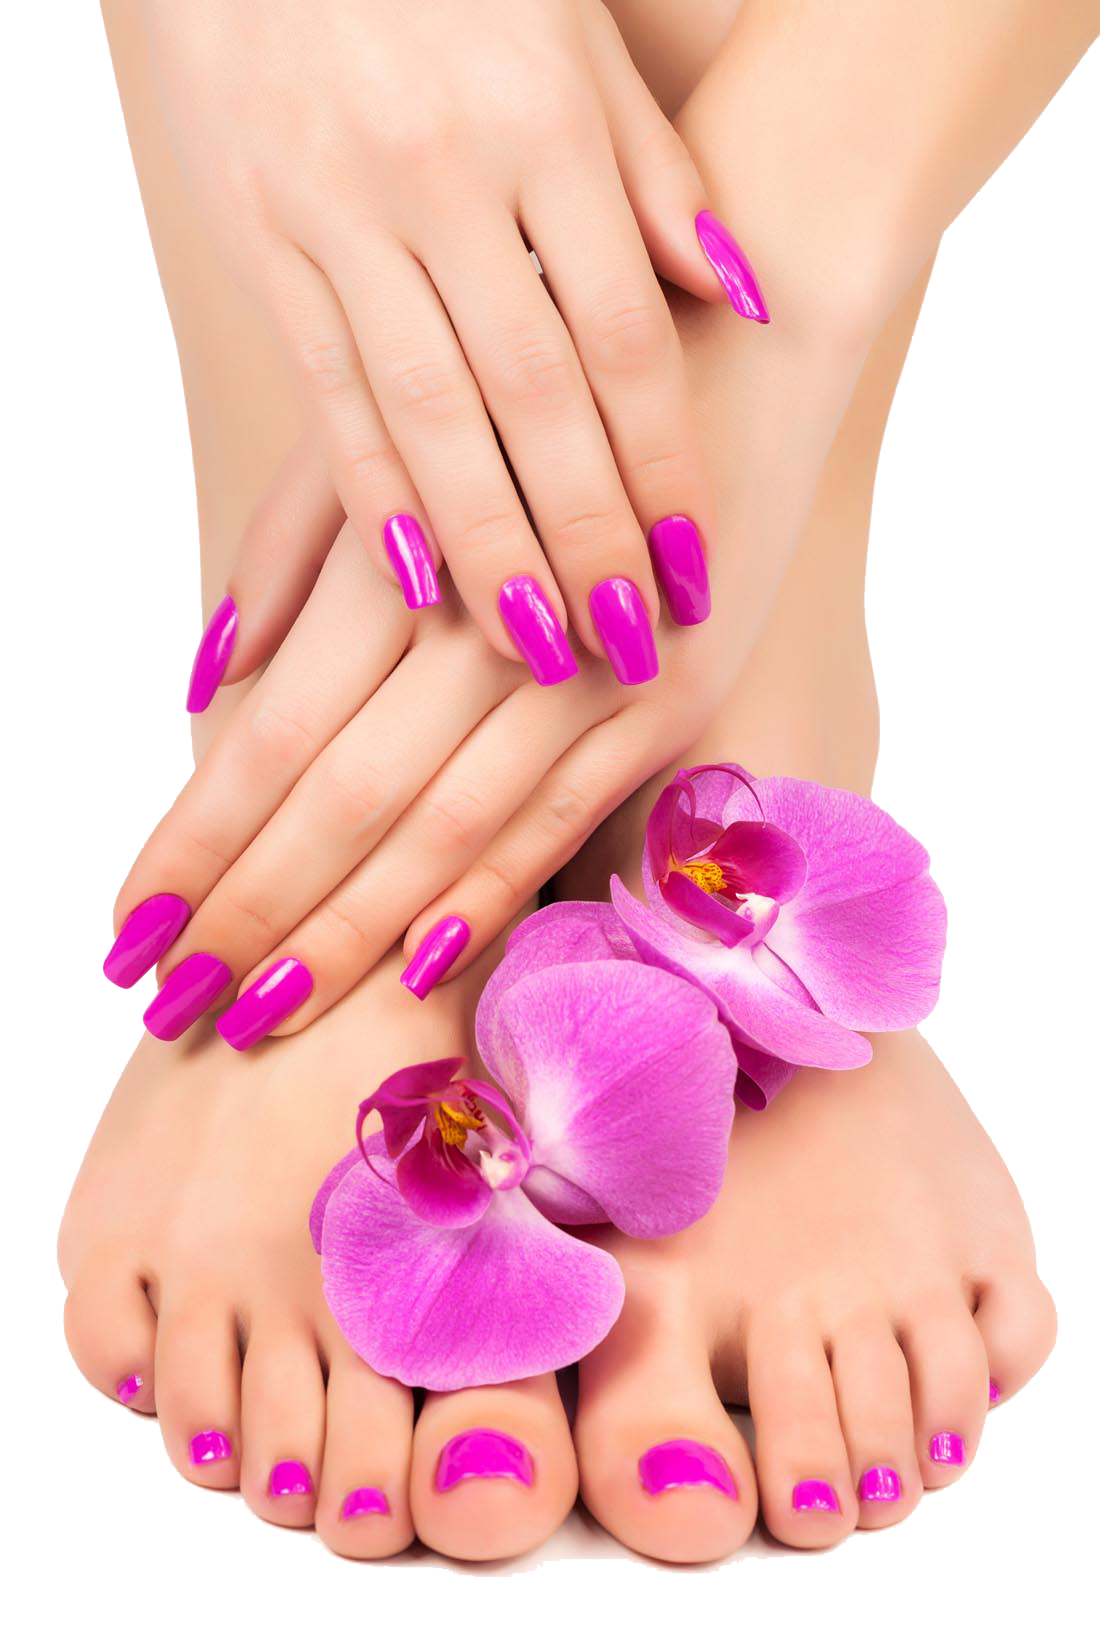 And Feet Close-Up Pedicure Lotion Nail Manicure Clipart